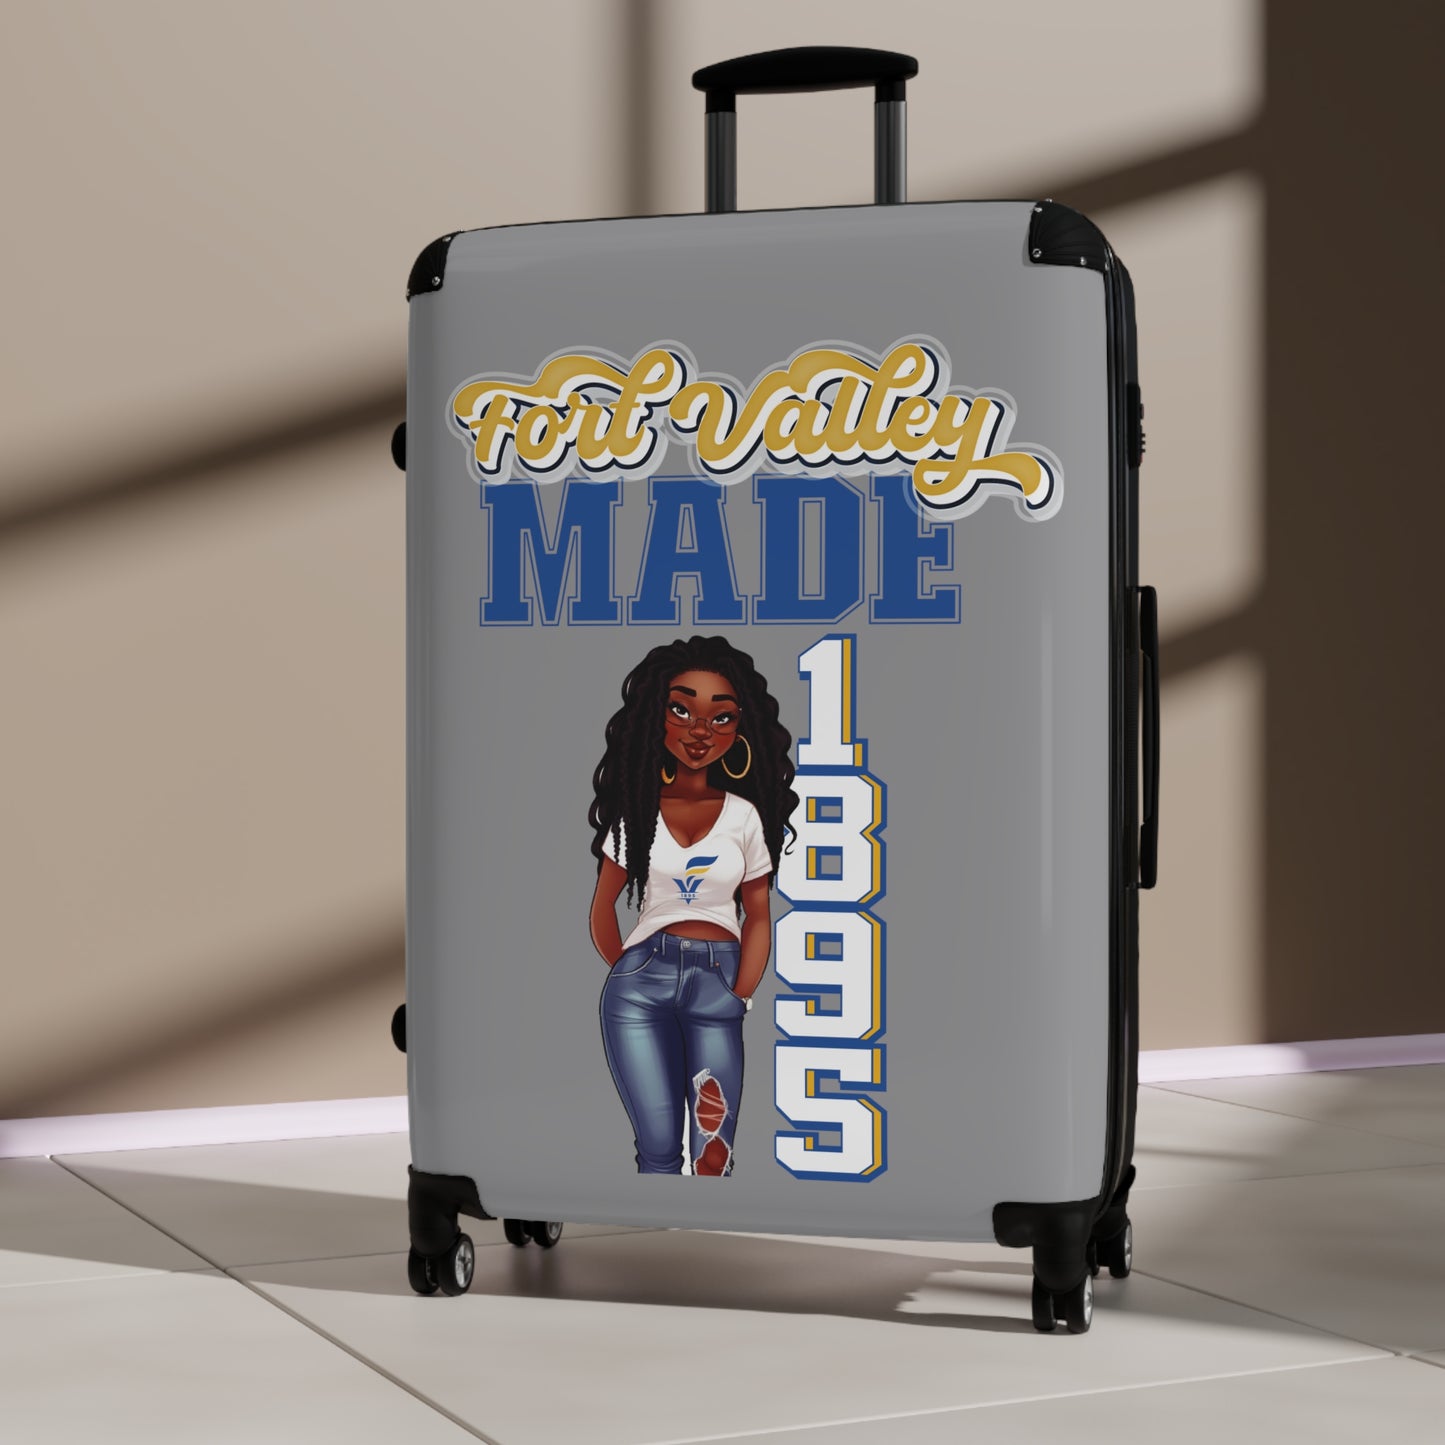 HBCU Love (Fort Valley State University Made/ Suitcase)